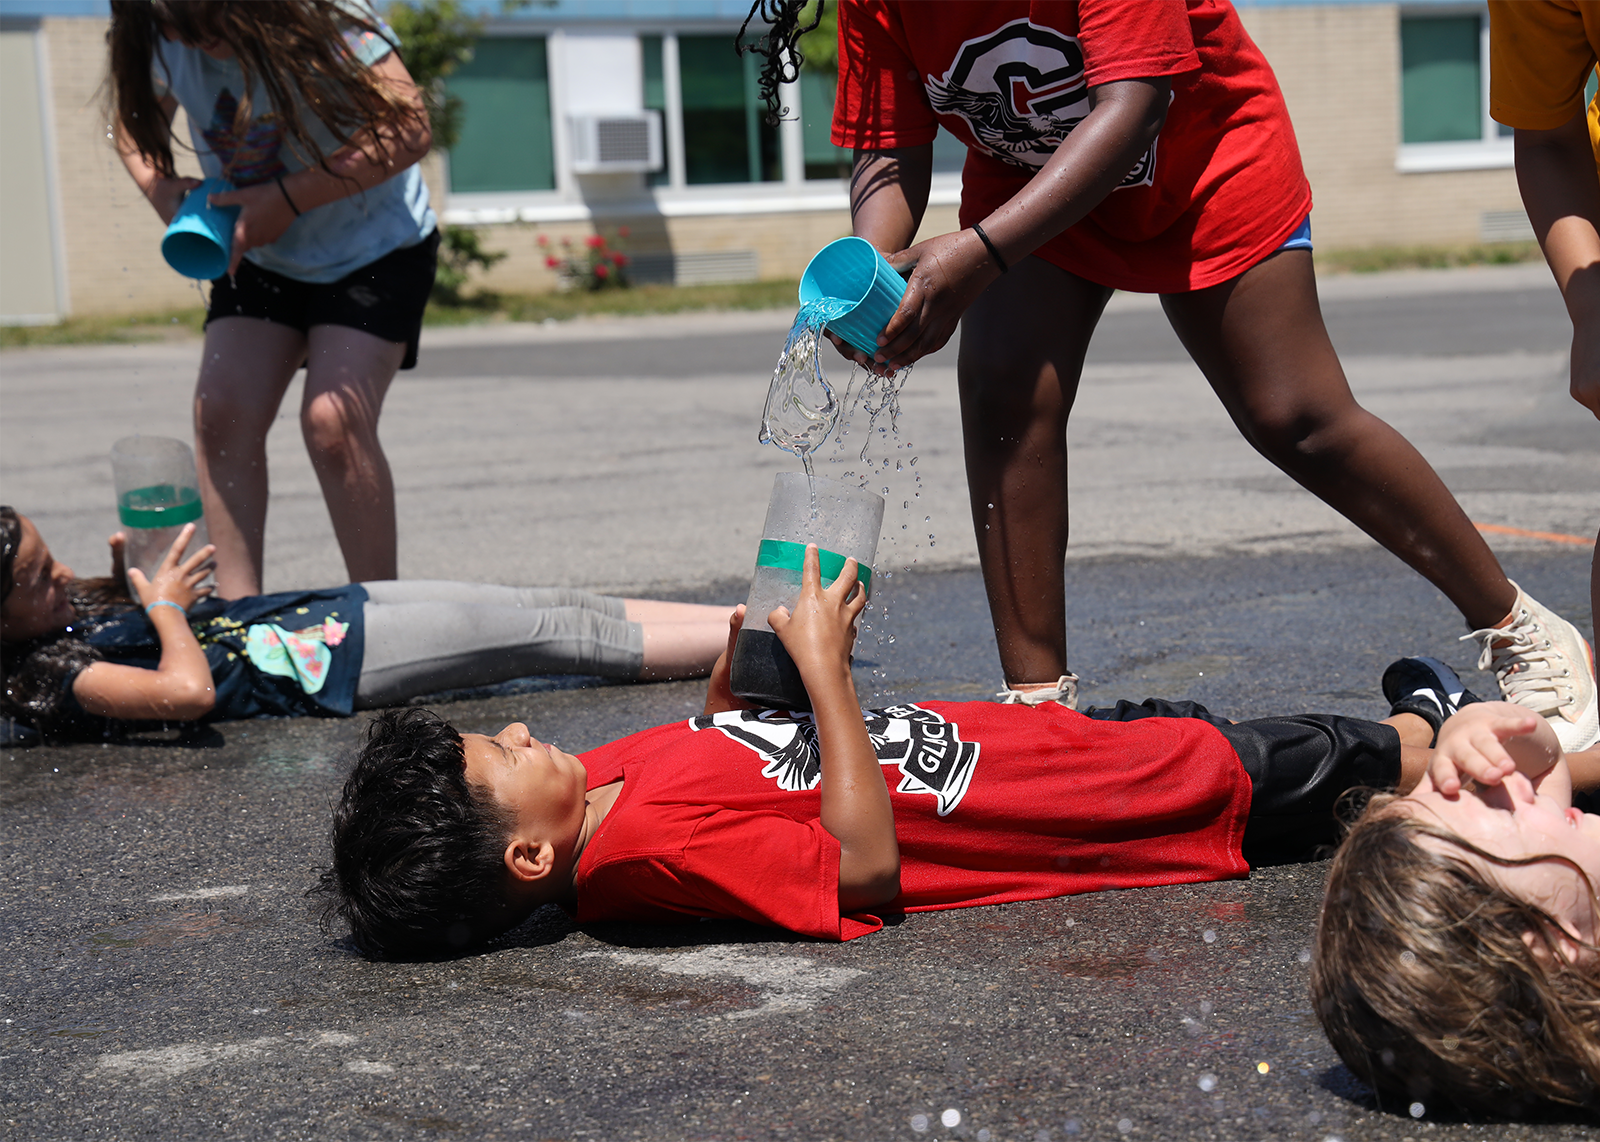 water games at field day